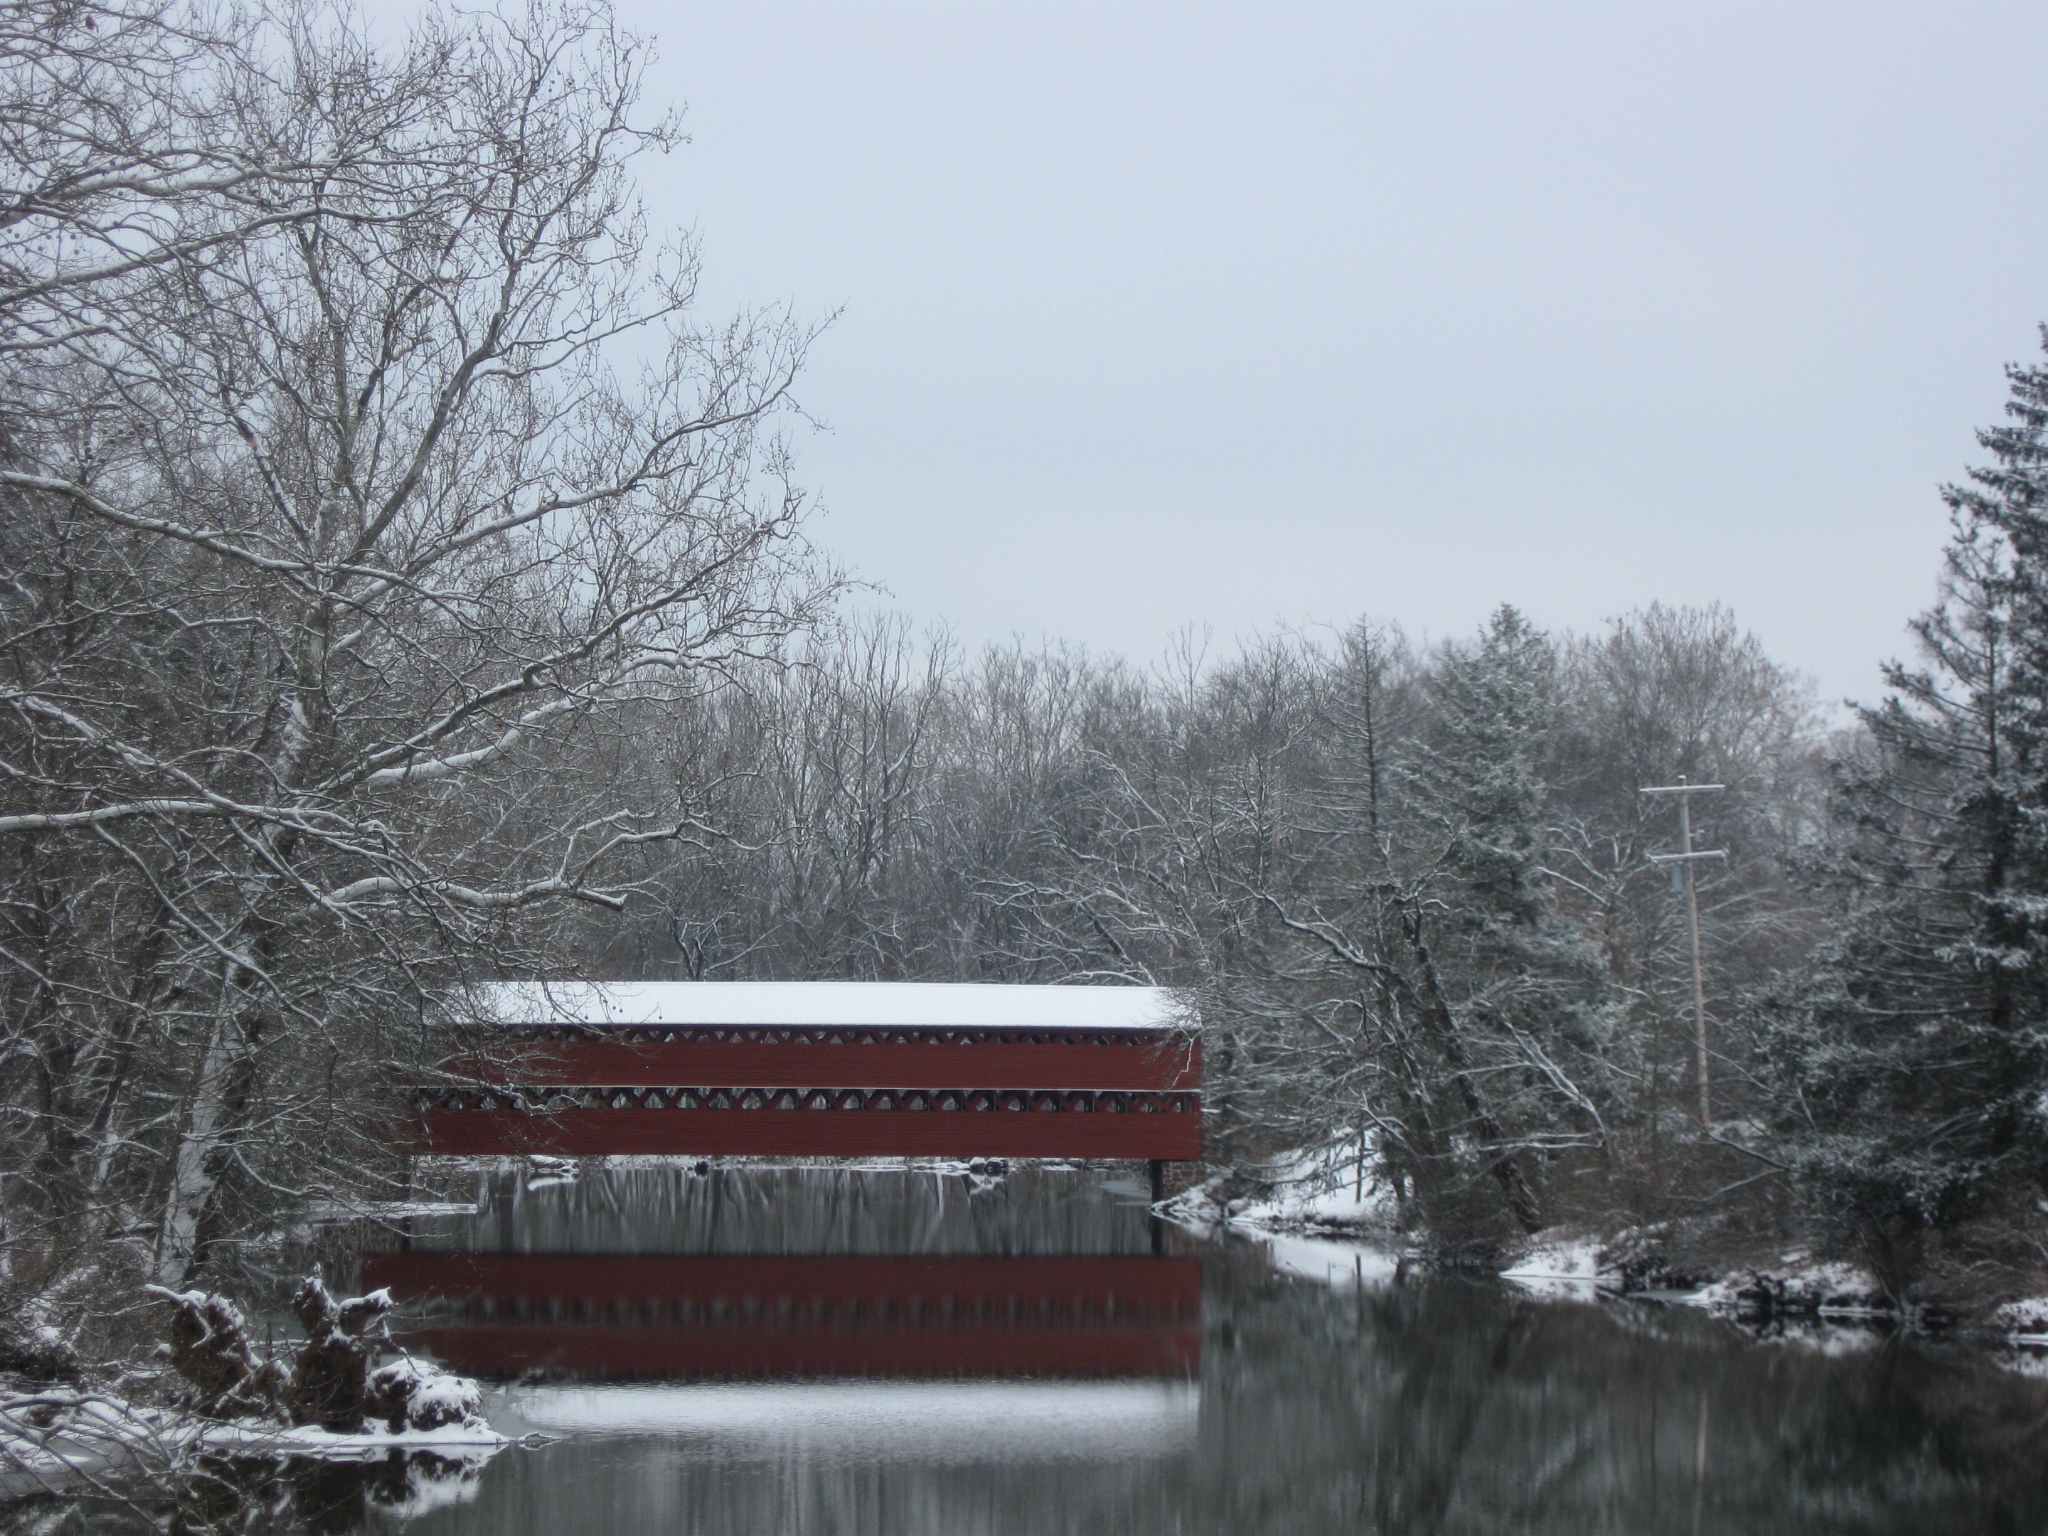 Sachs Covered Bridge on New Year's Eve